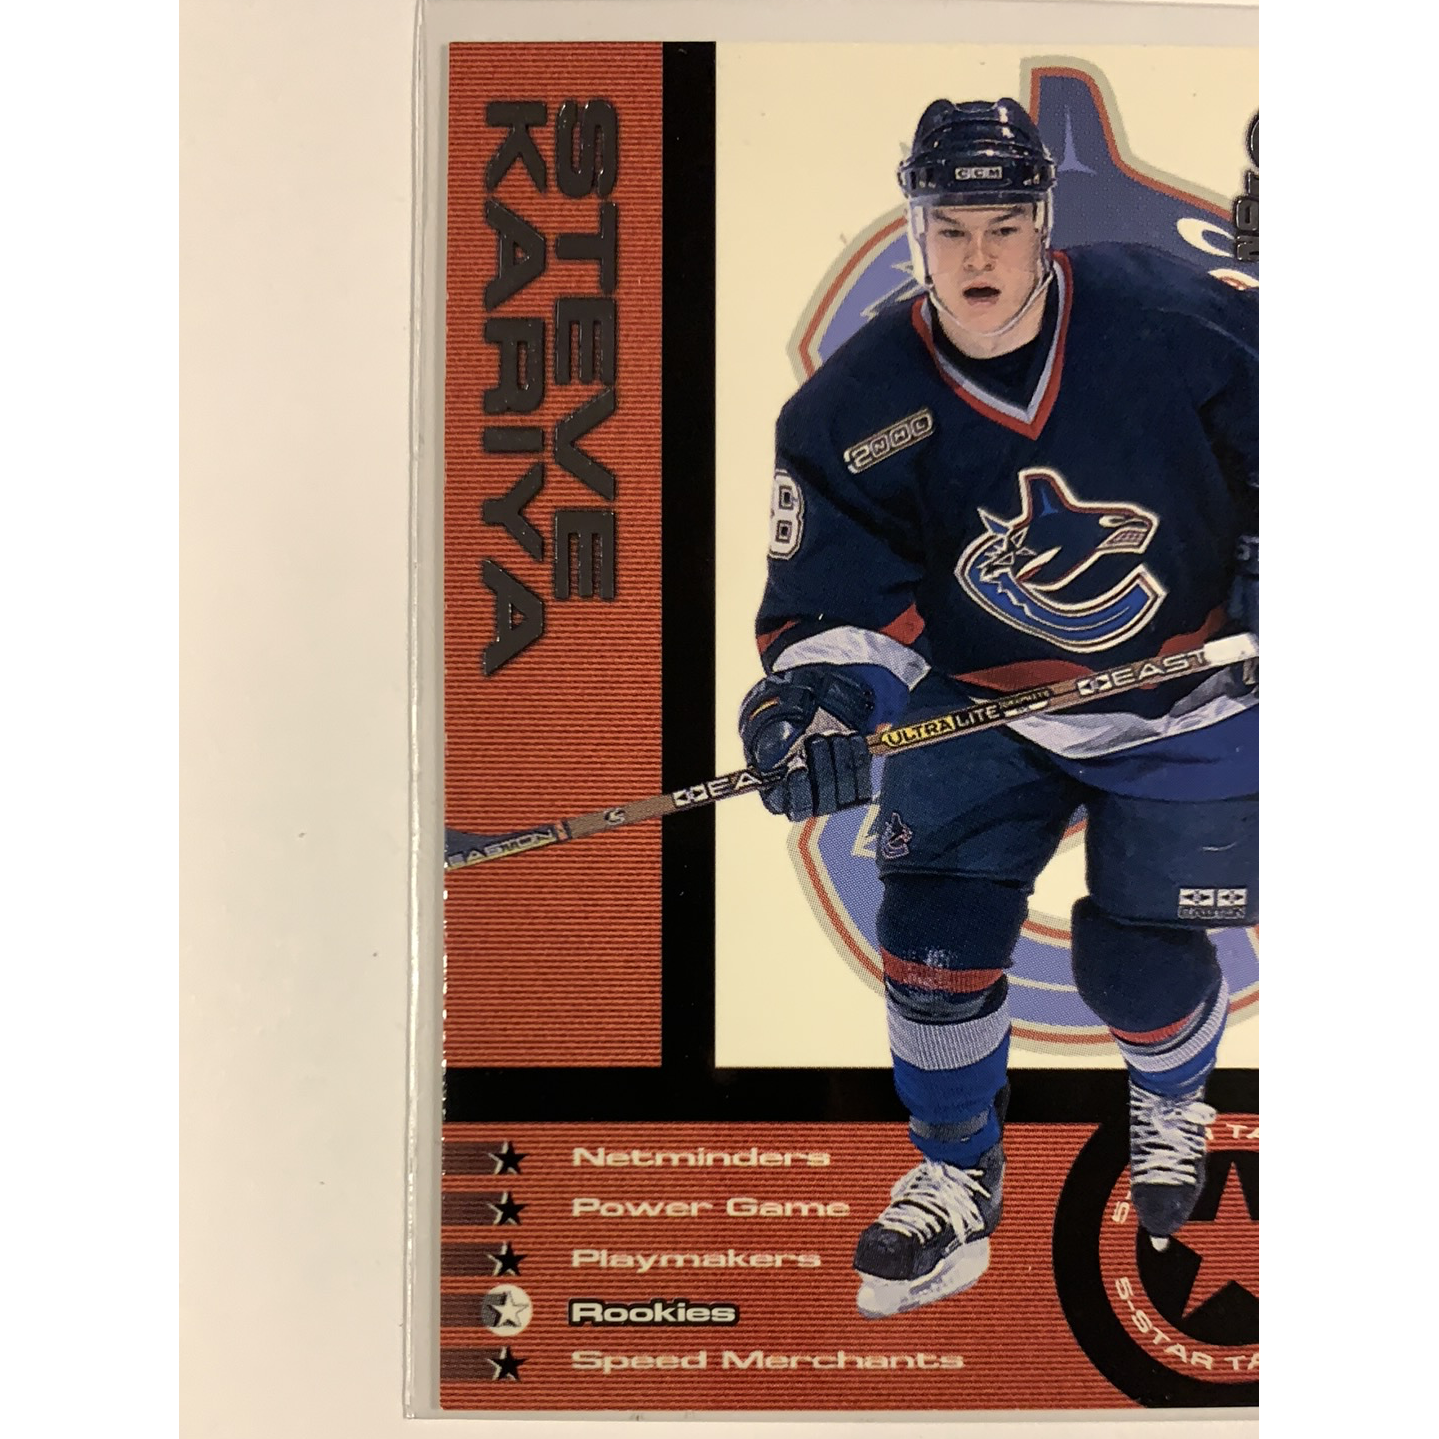  2000-01 Pacific Omega Steve Kariya Rookies  Local Legends Cards & Collectibles